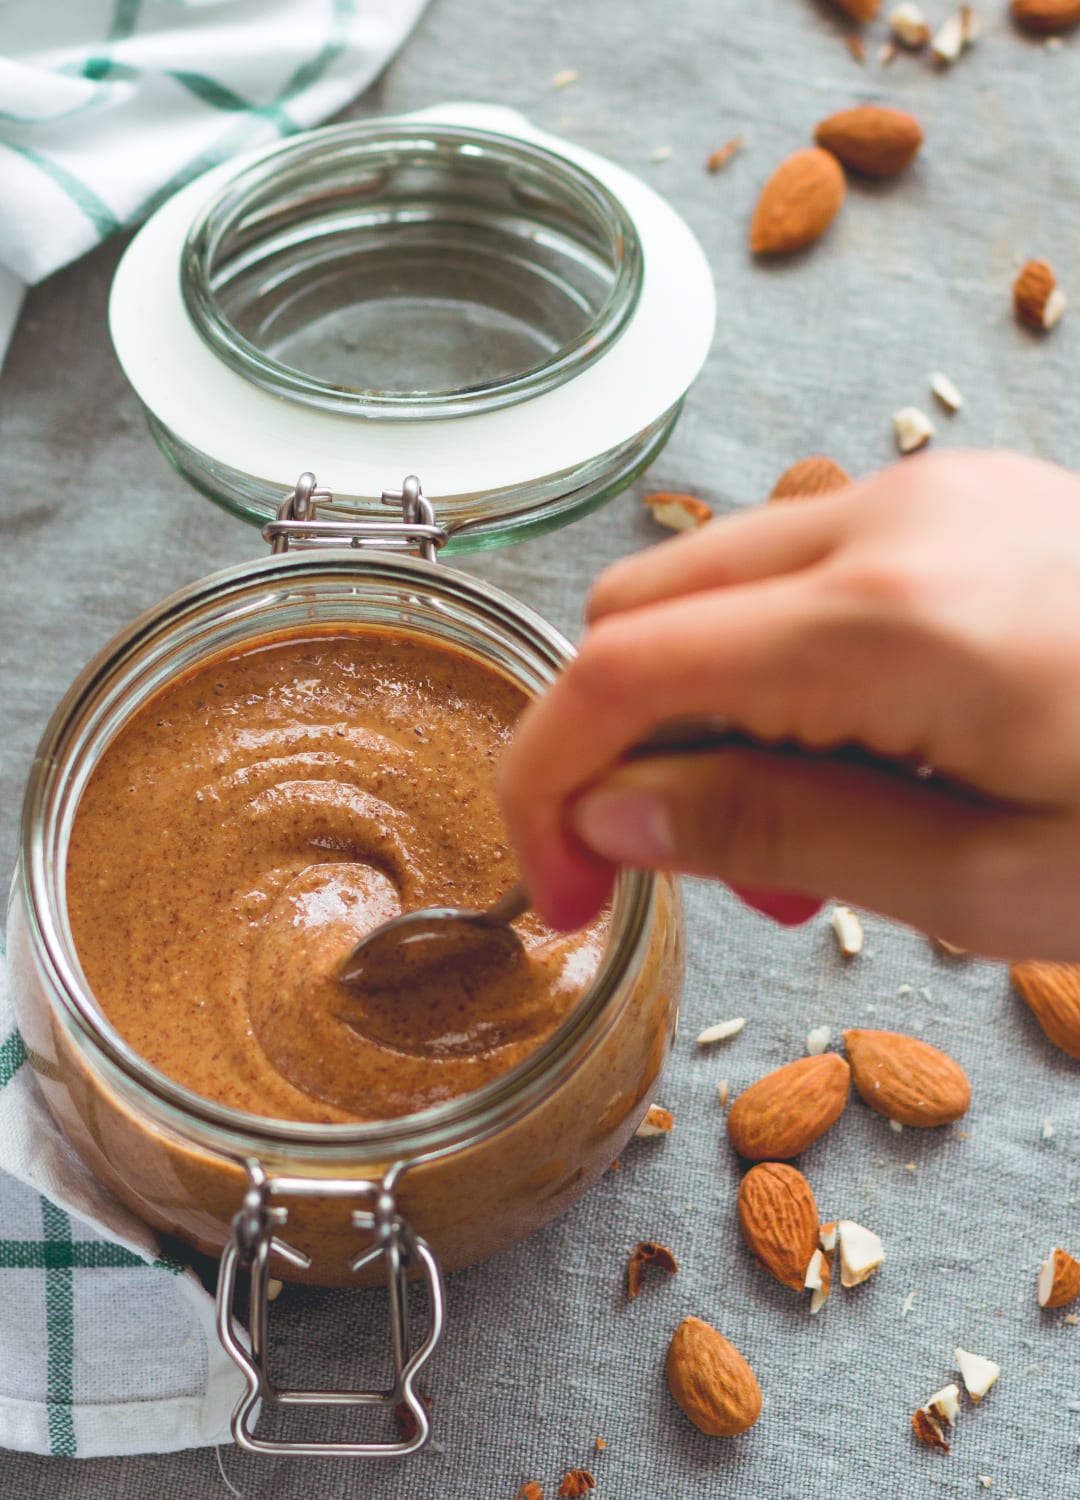 How to Make Almond Butter - homemade almond butter is much tastier than store-bought and extremely easy to make! You'll love making your own. Enjoy plain or try one of my recommended flavors! | thehealthfulideas.com